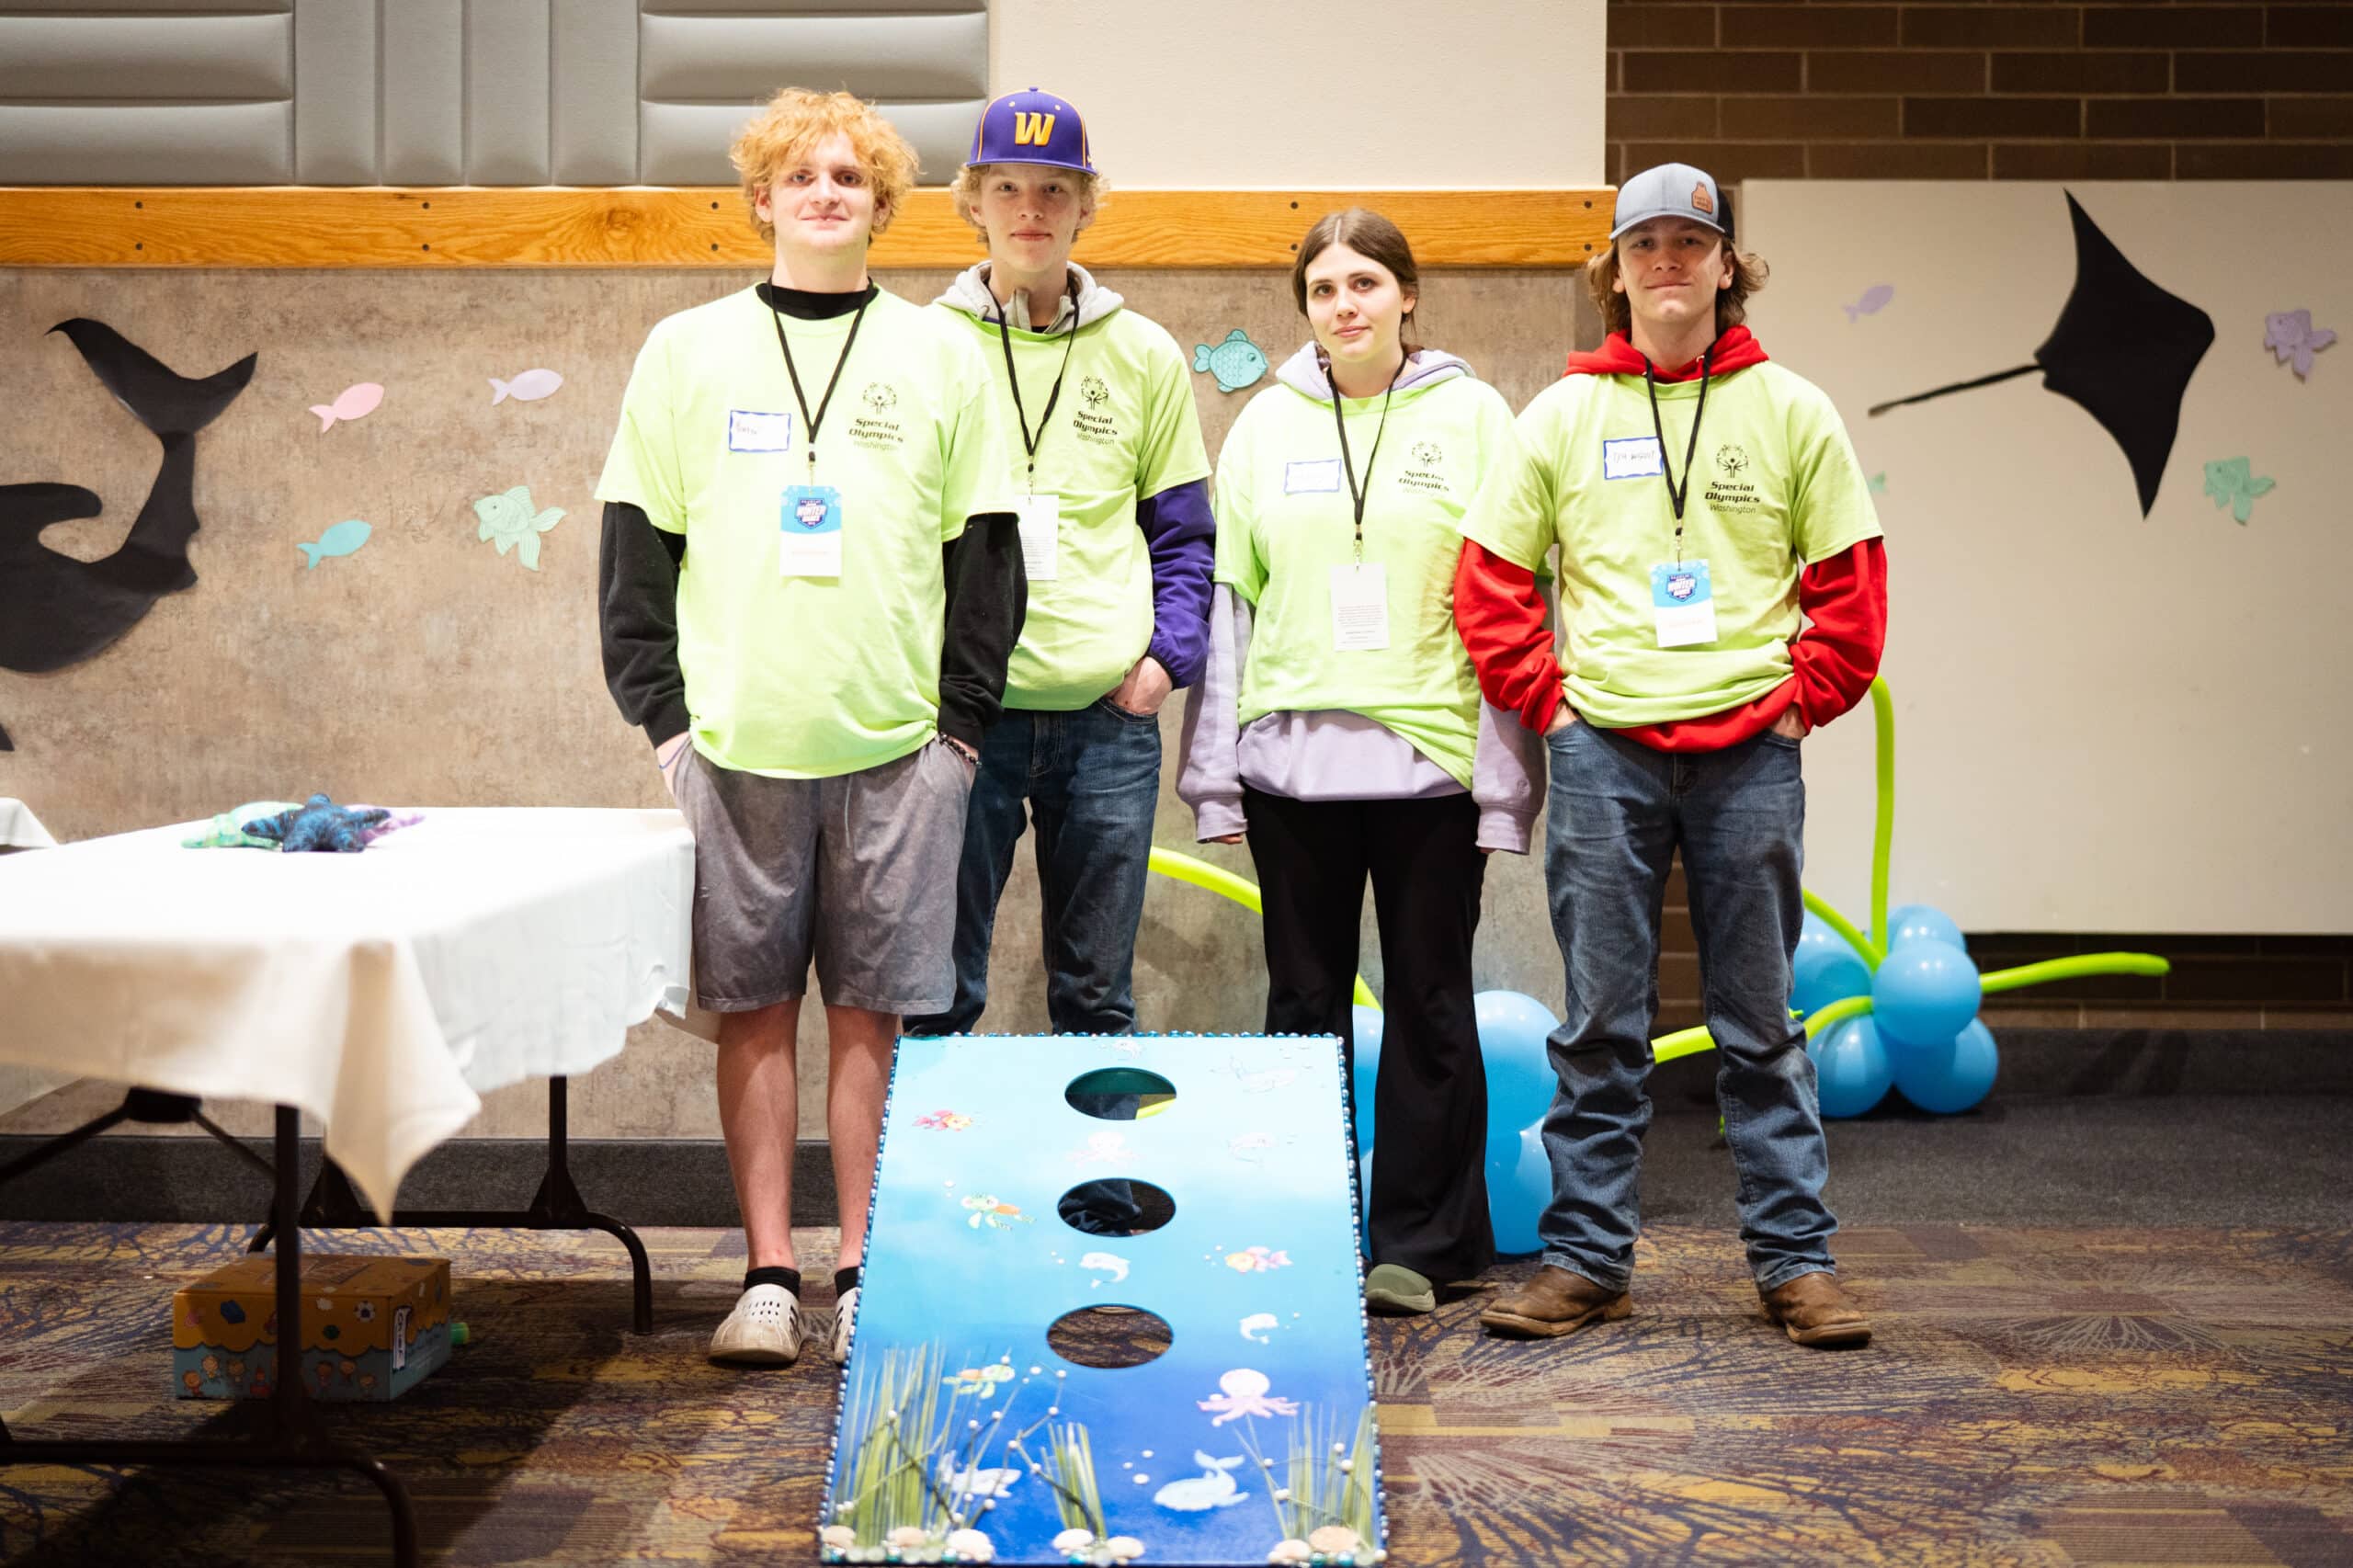 Four students in yellow volunteer t-shirts stand behind their blue corn hole game that they made.